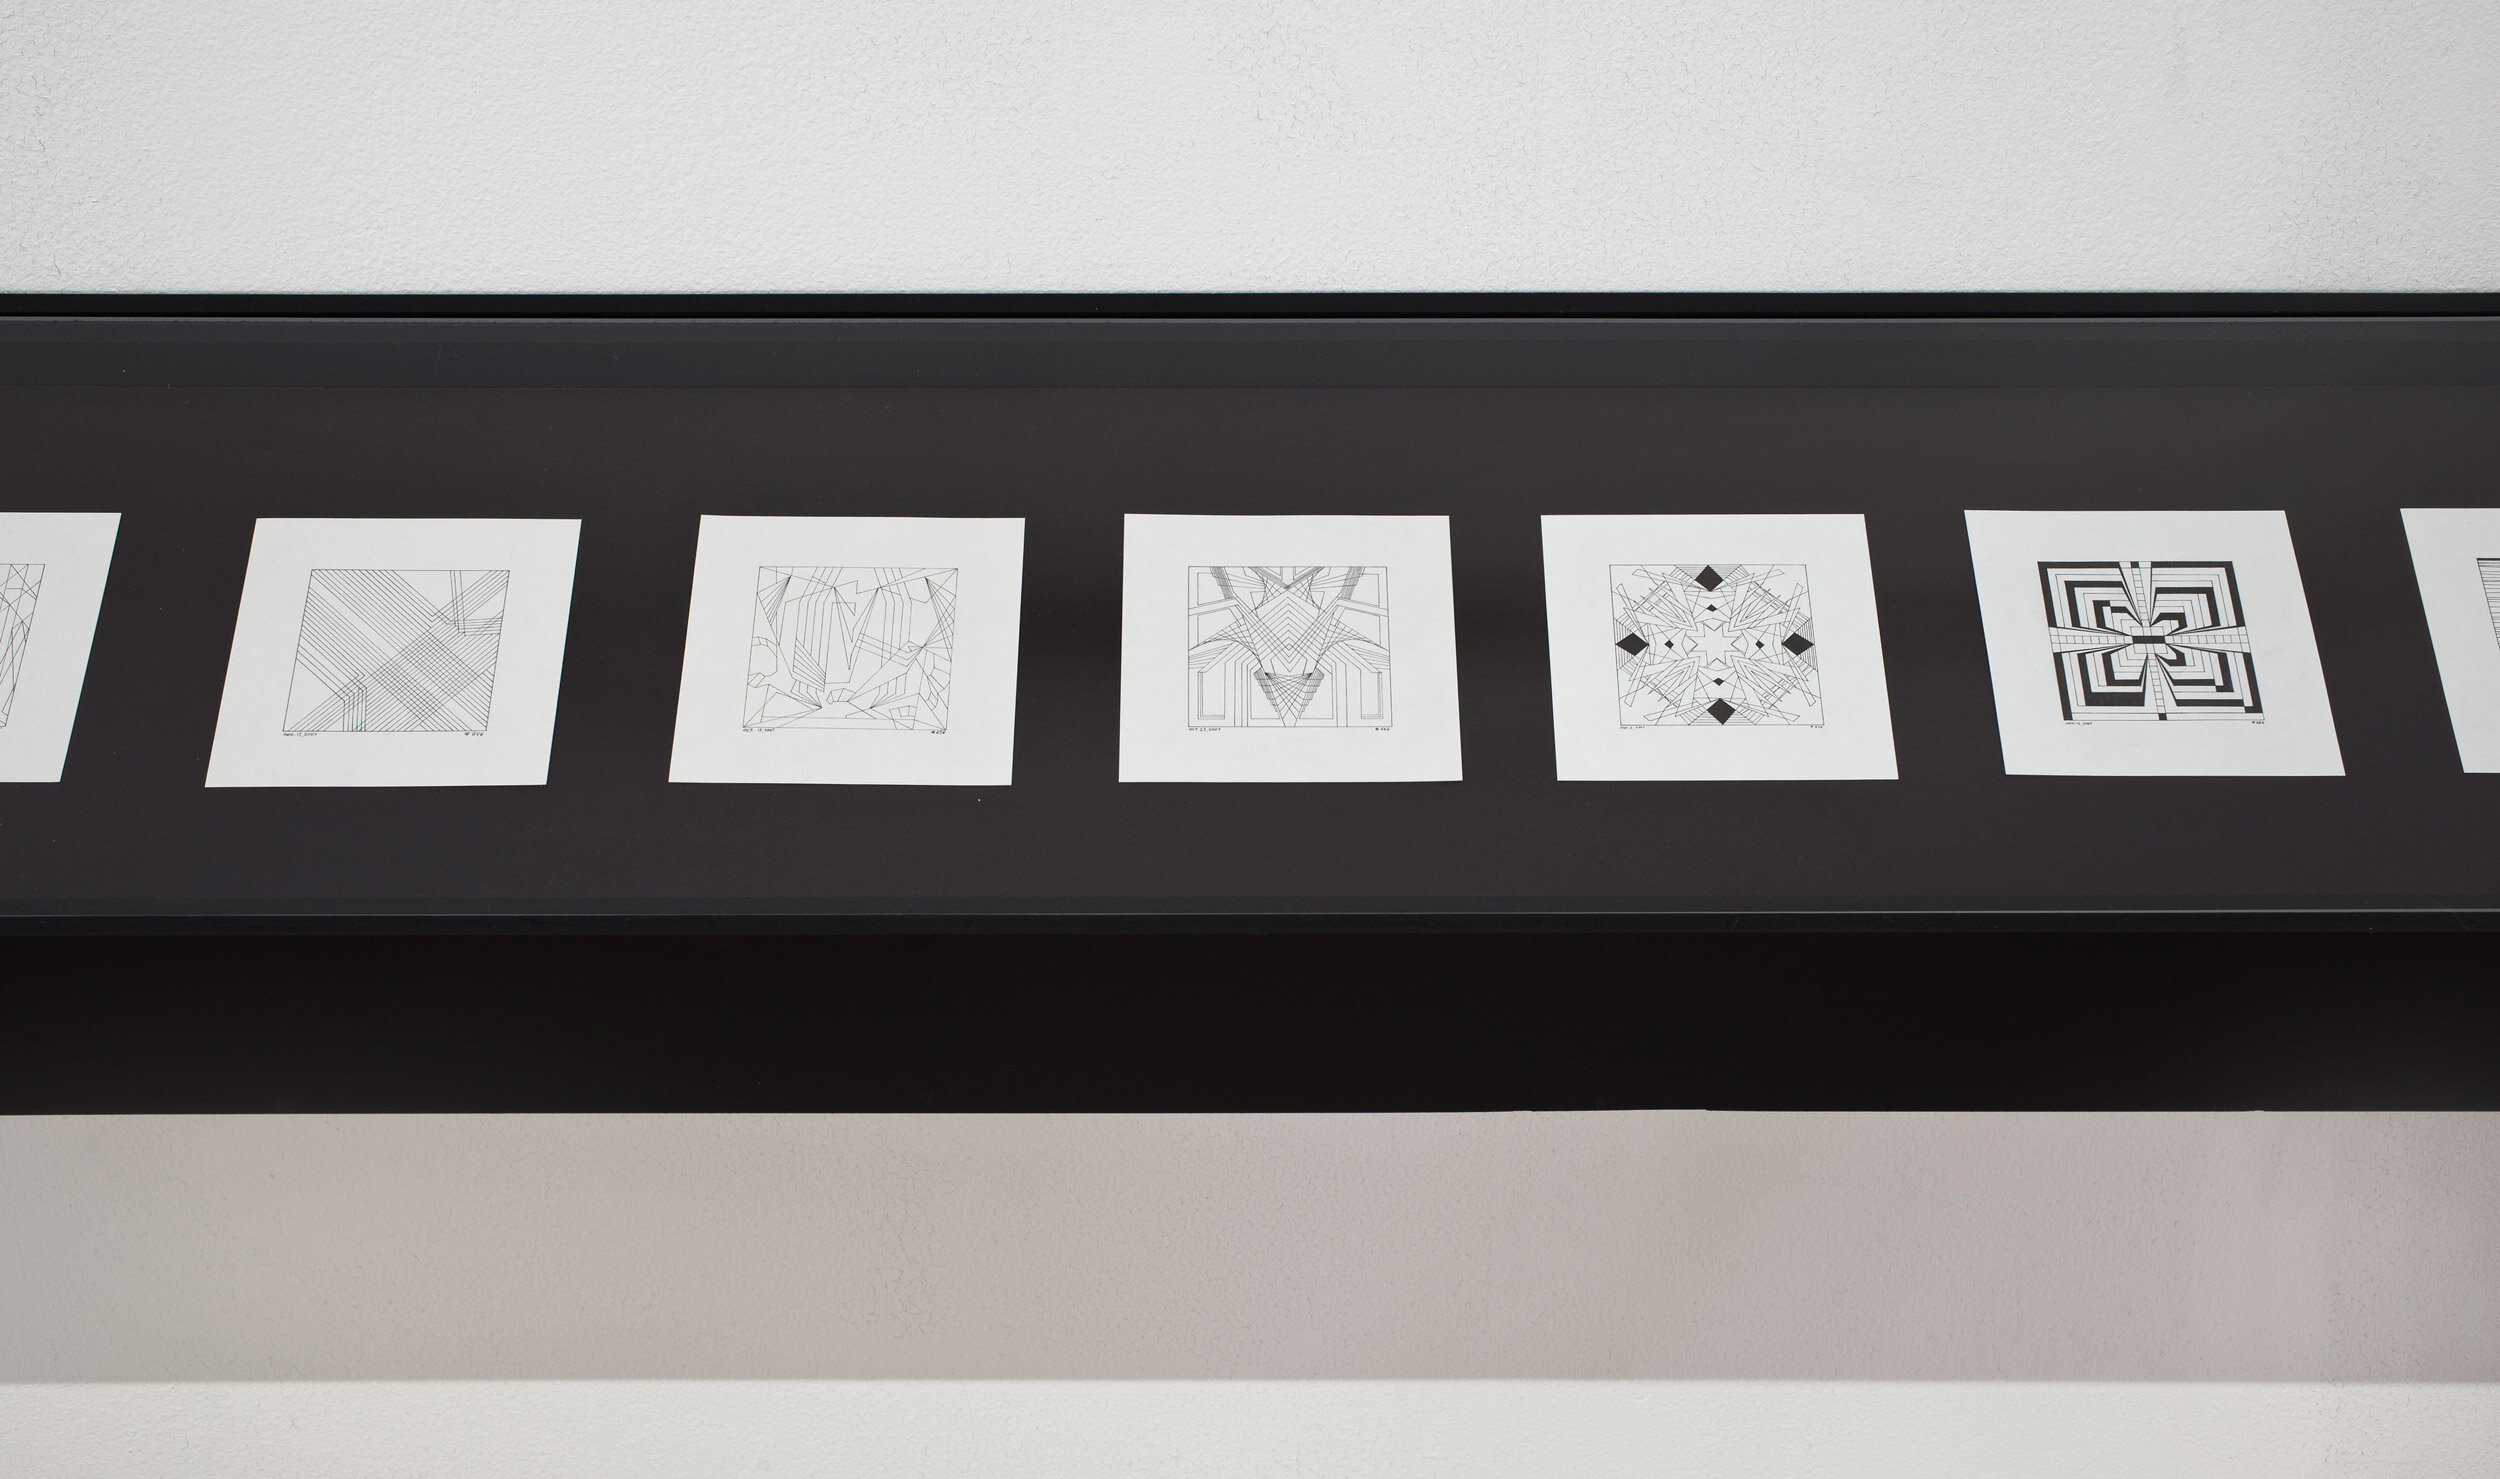    Scheherazade    Tape on wall, ink drawings on paper in wooden shelves 